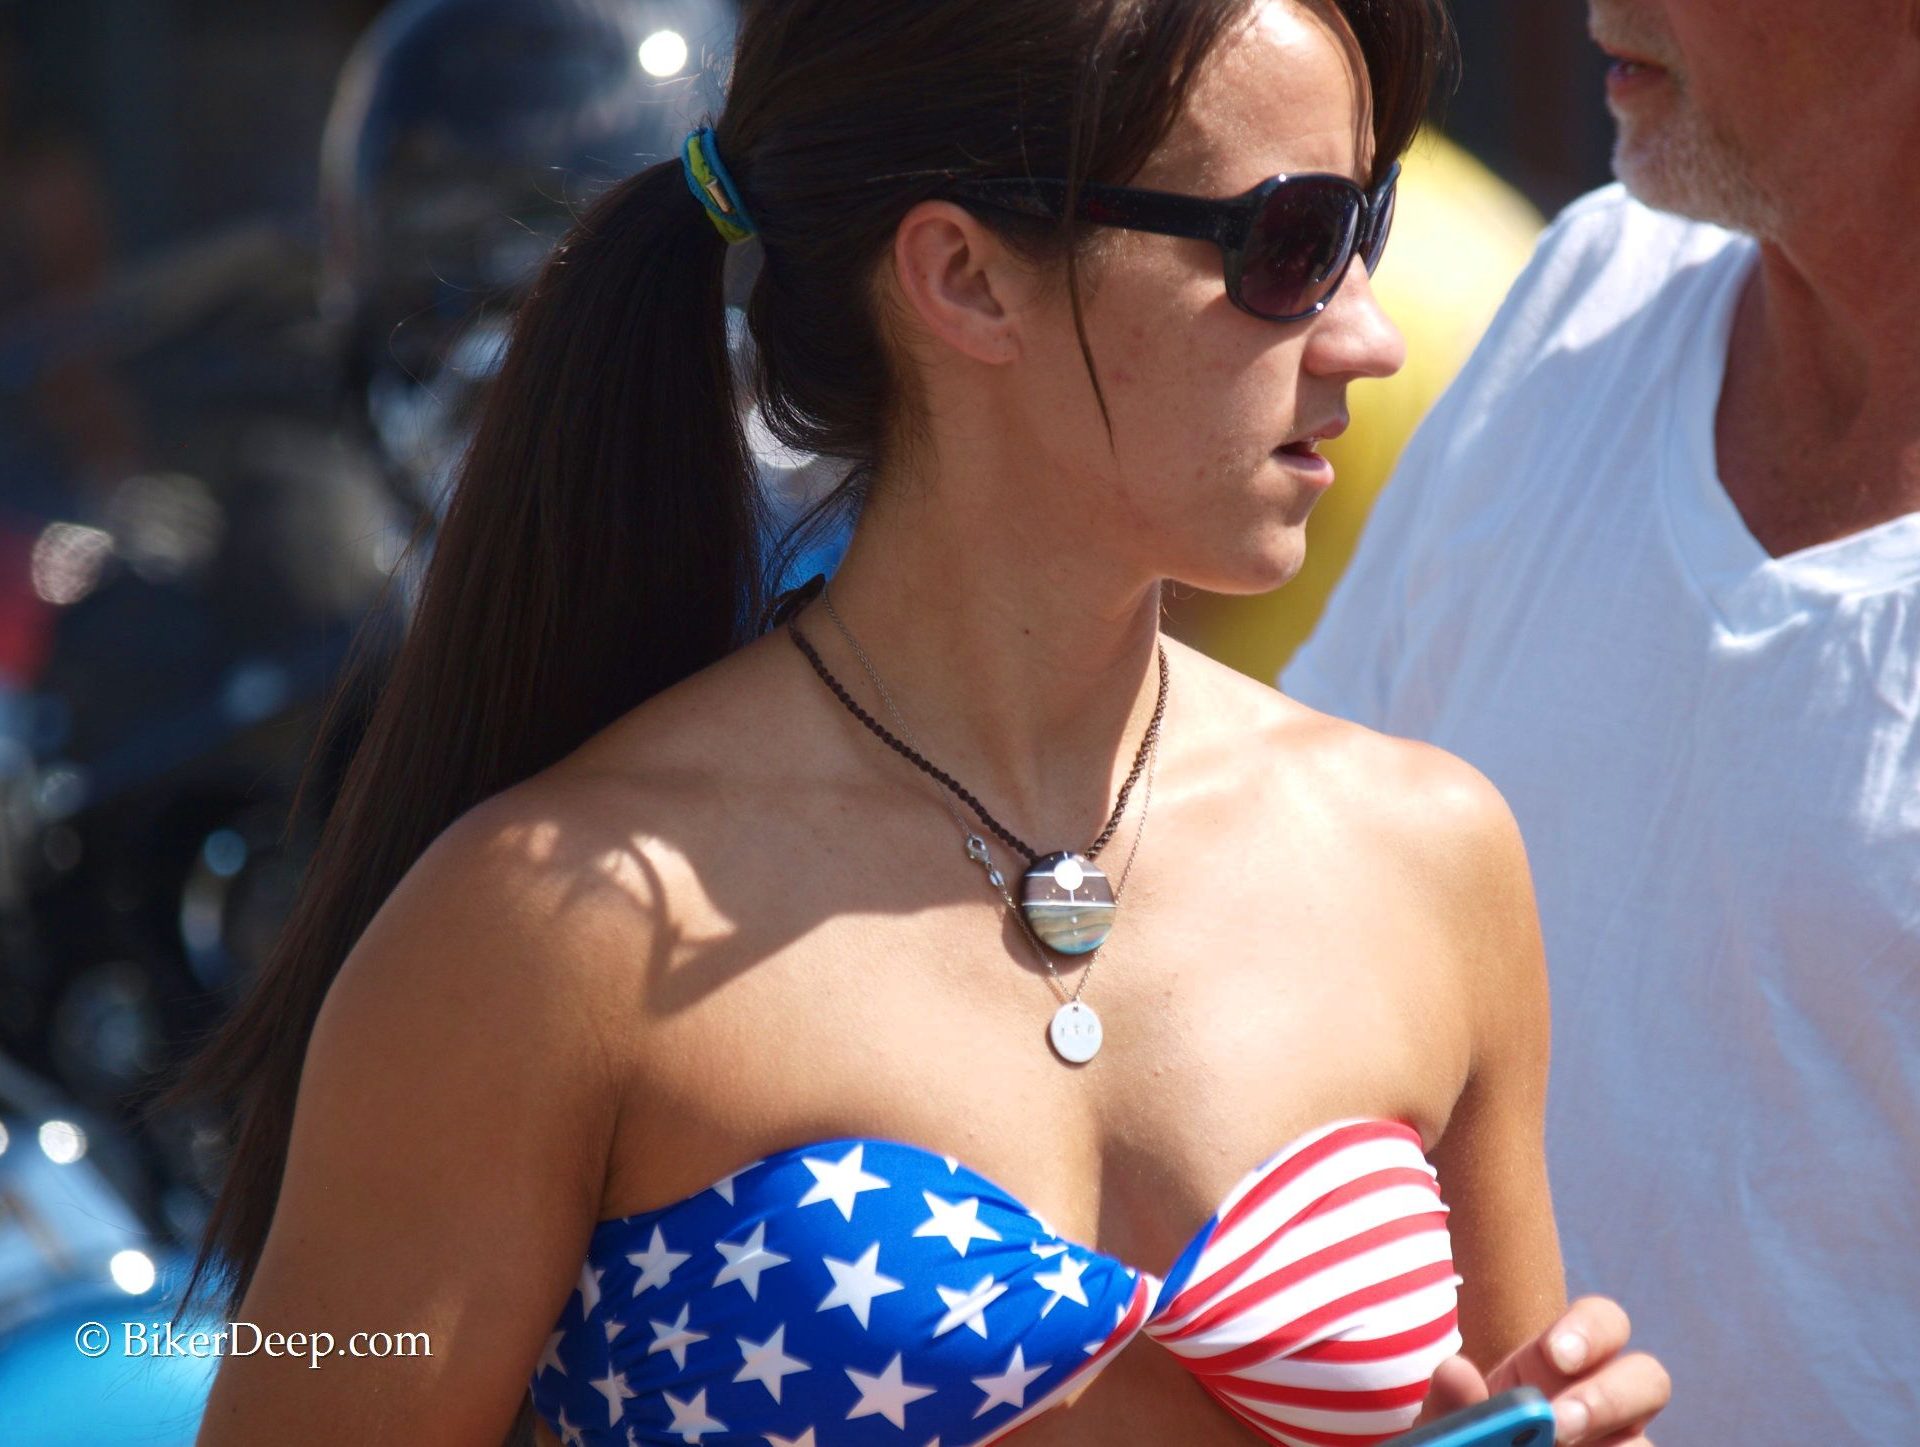 Woman patriot outfit